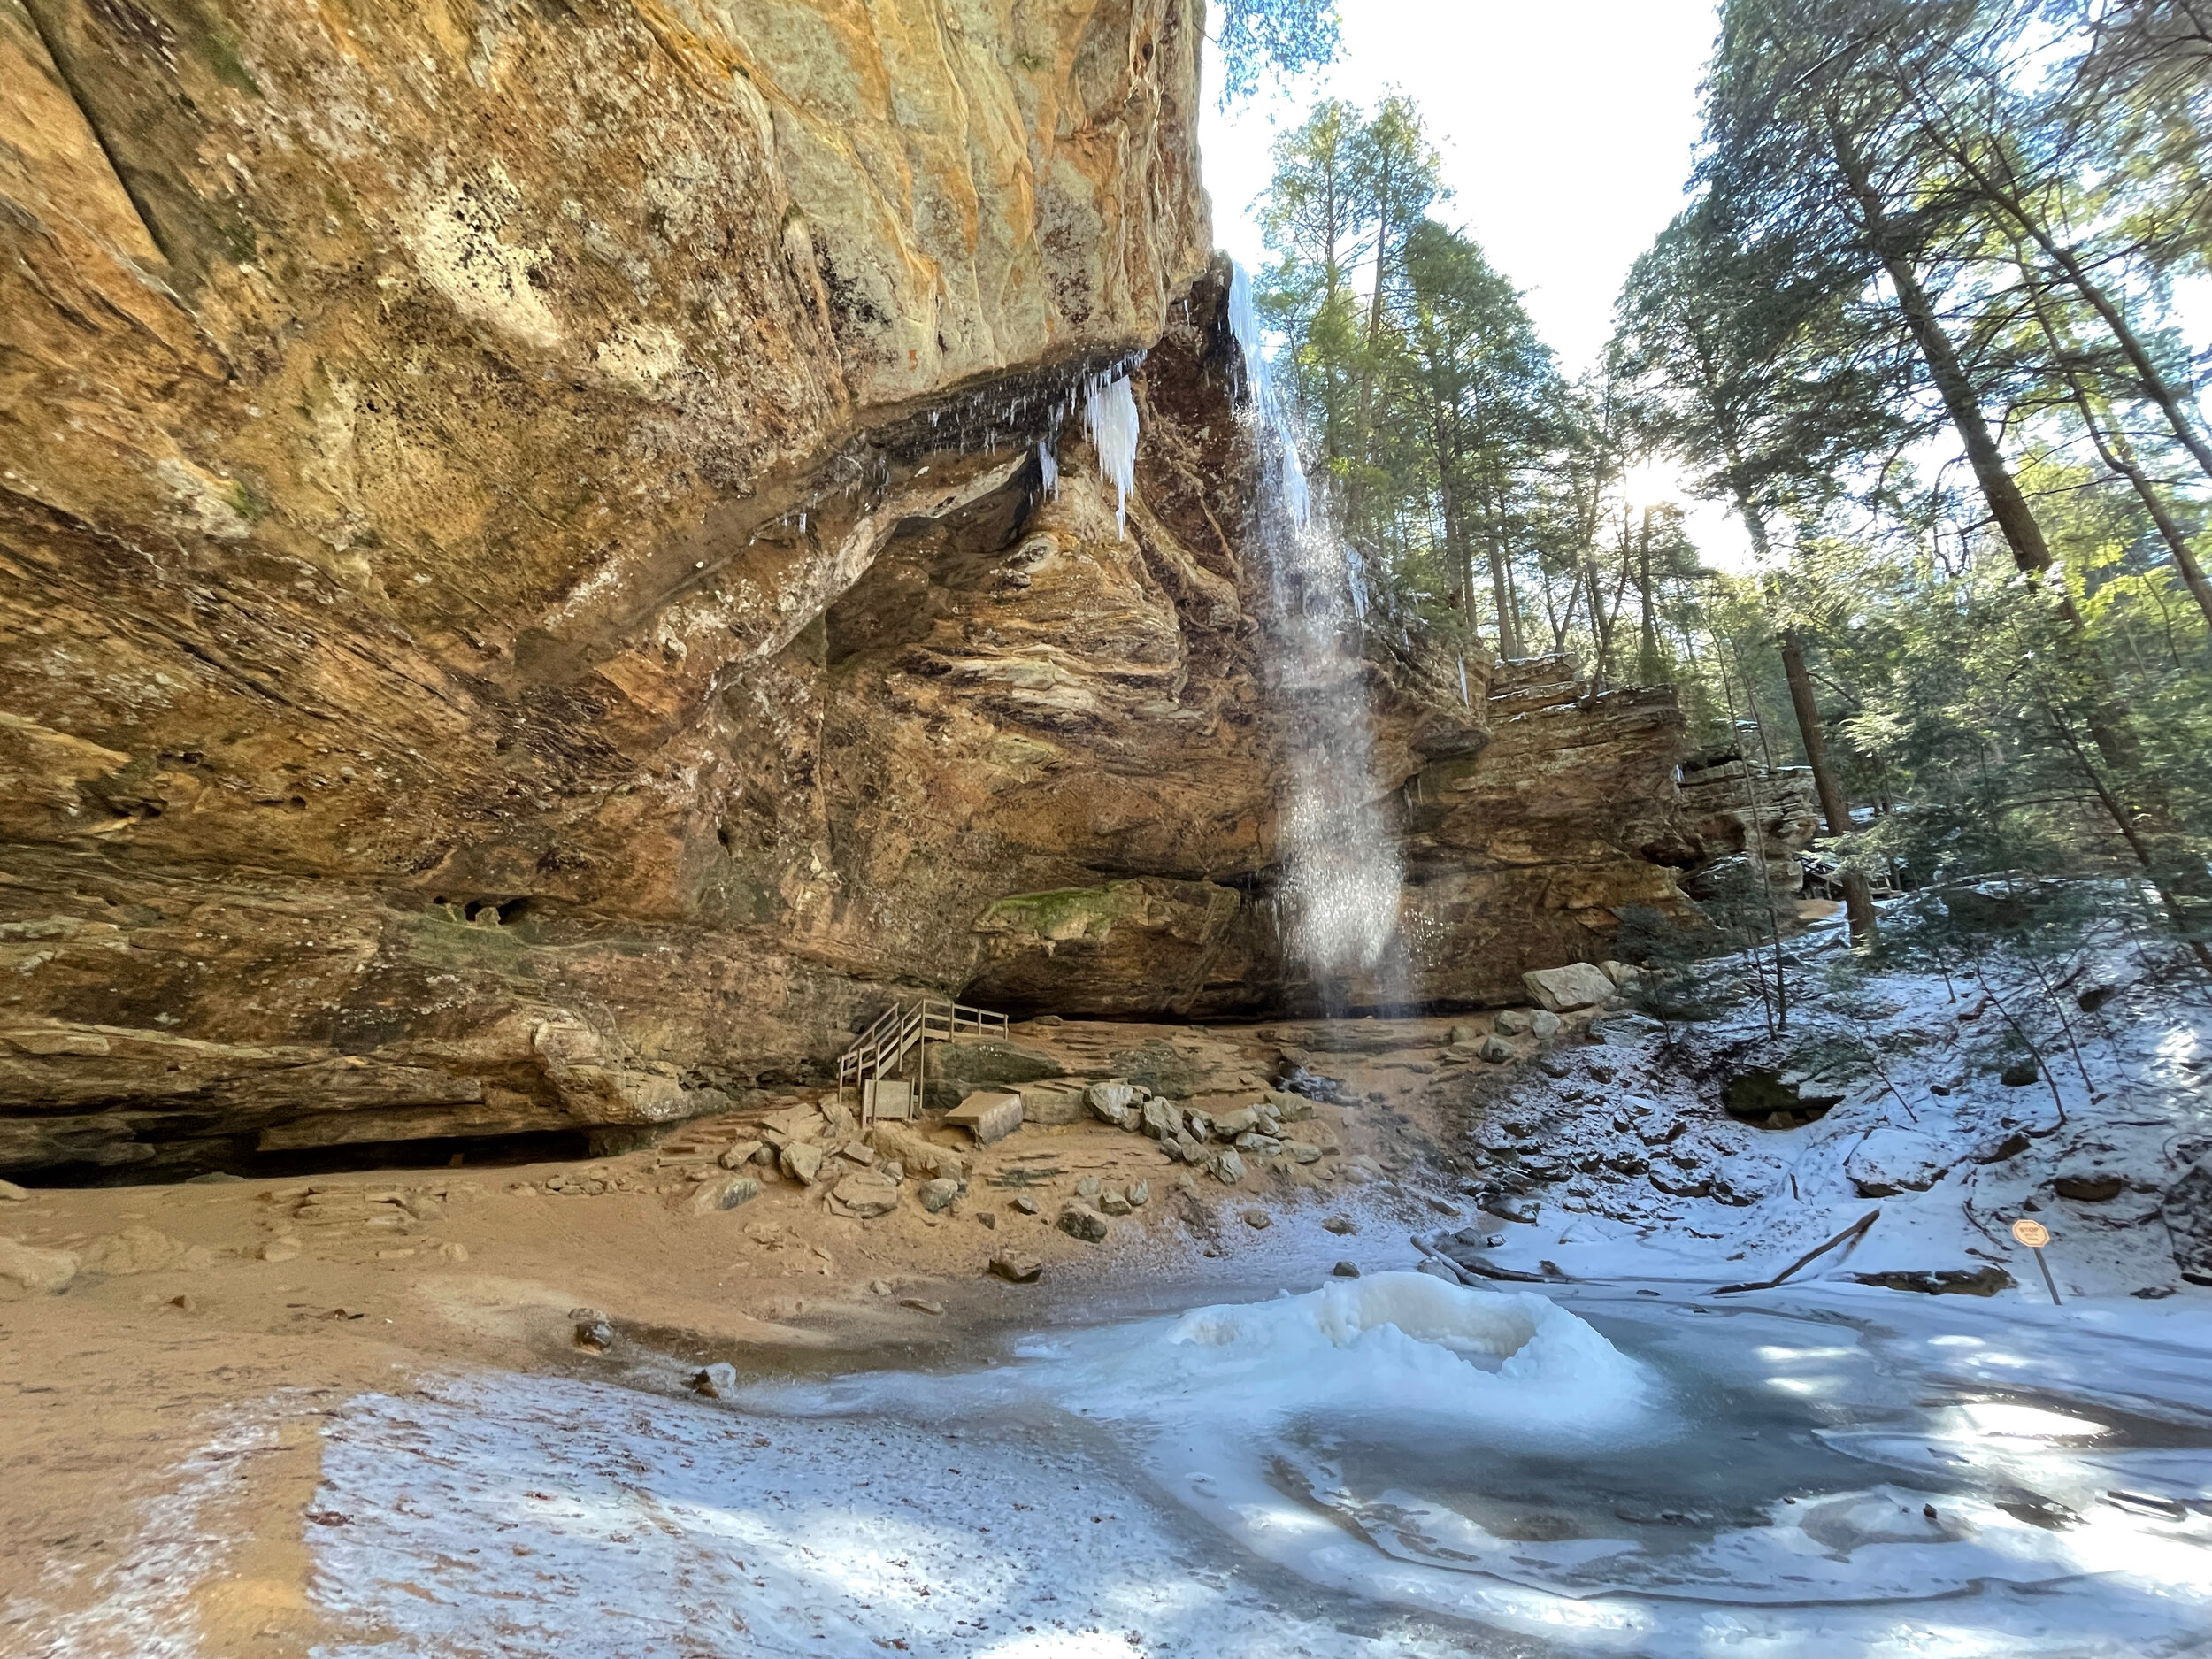 Exploring Ash Cave at Hocking Hills State Park - Ohio’s Largest Cave